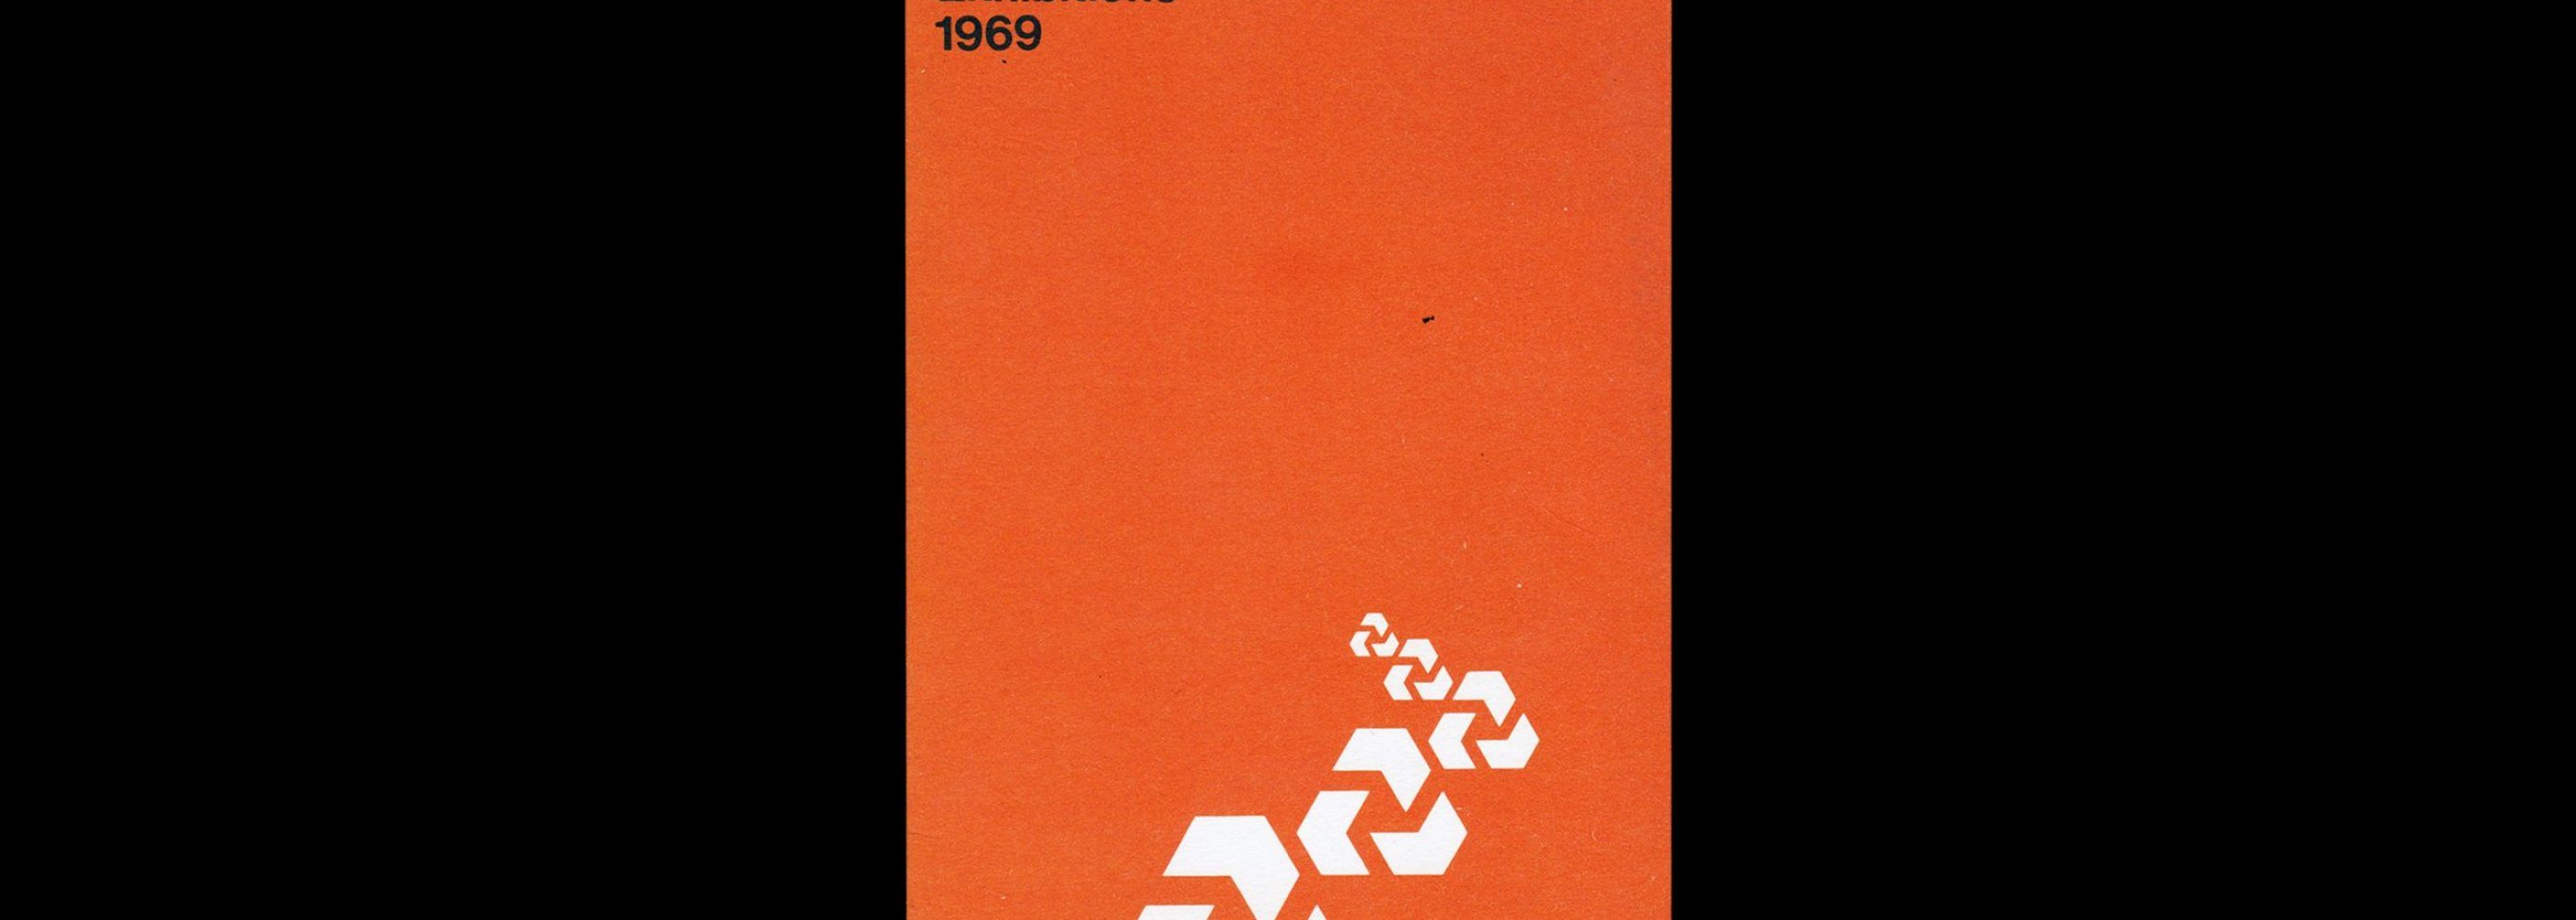 National Westminster Bank Group at Agricultural Shows and Exhibitions 1969, Brochure